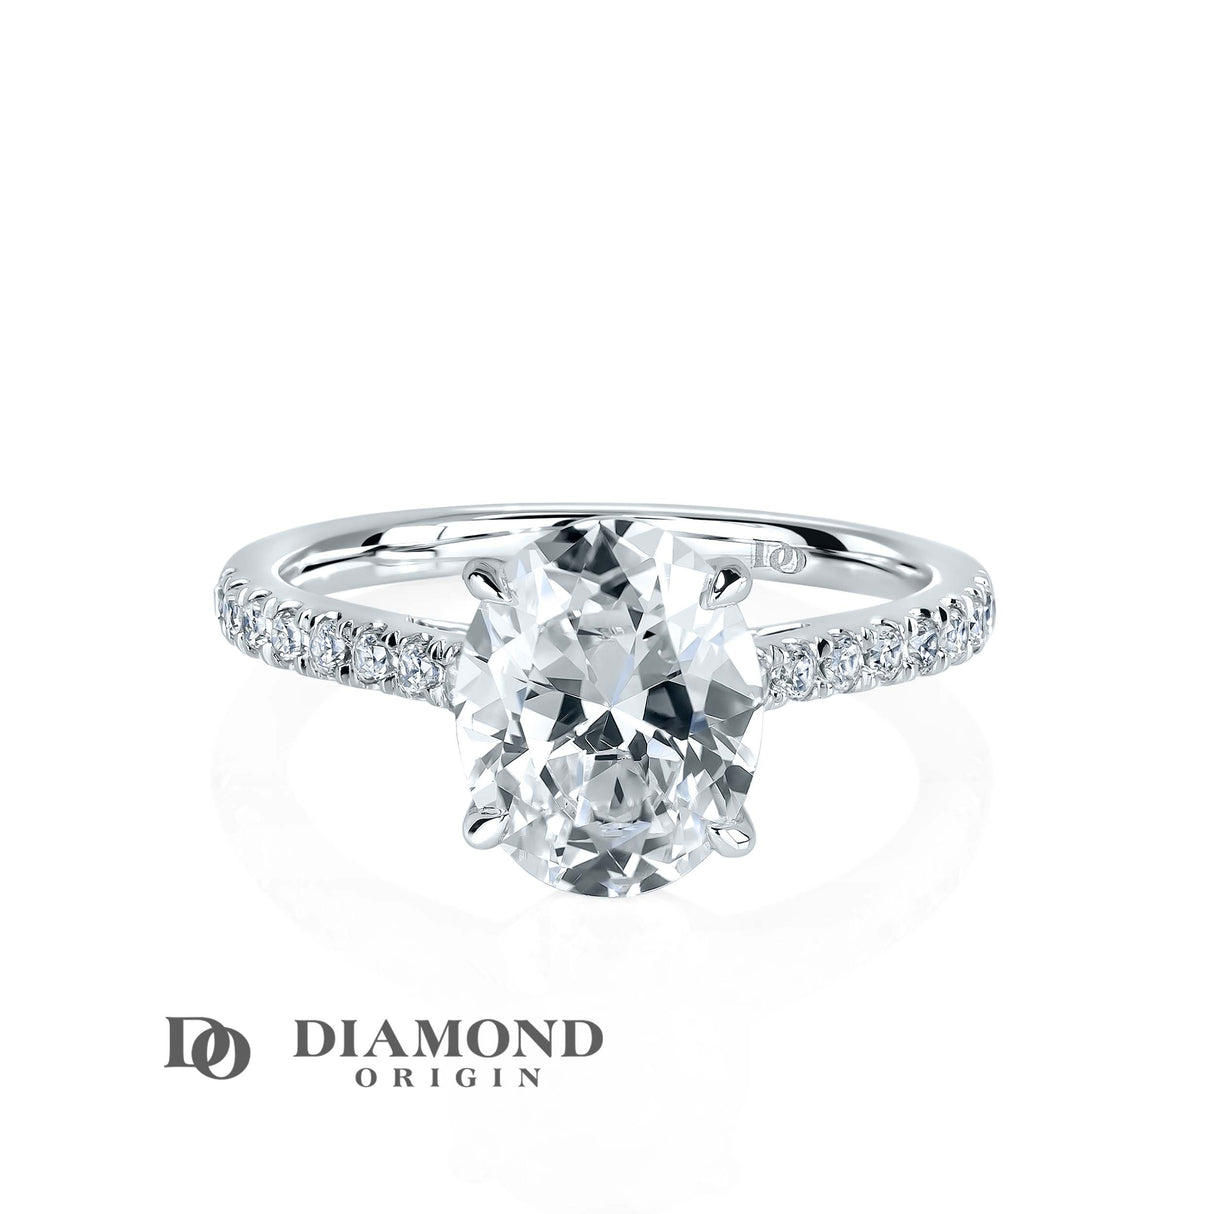  Diamond Oval Solitaire Ring brings a timeless beauty to any look. The Central Stone is 2Ct, with diamond side accents for added sparkle, diamond ring, diamond rings, lab created diamond, lab crated diamonds, 2 ct diamond, lab grown diamonds